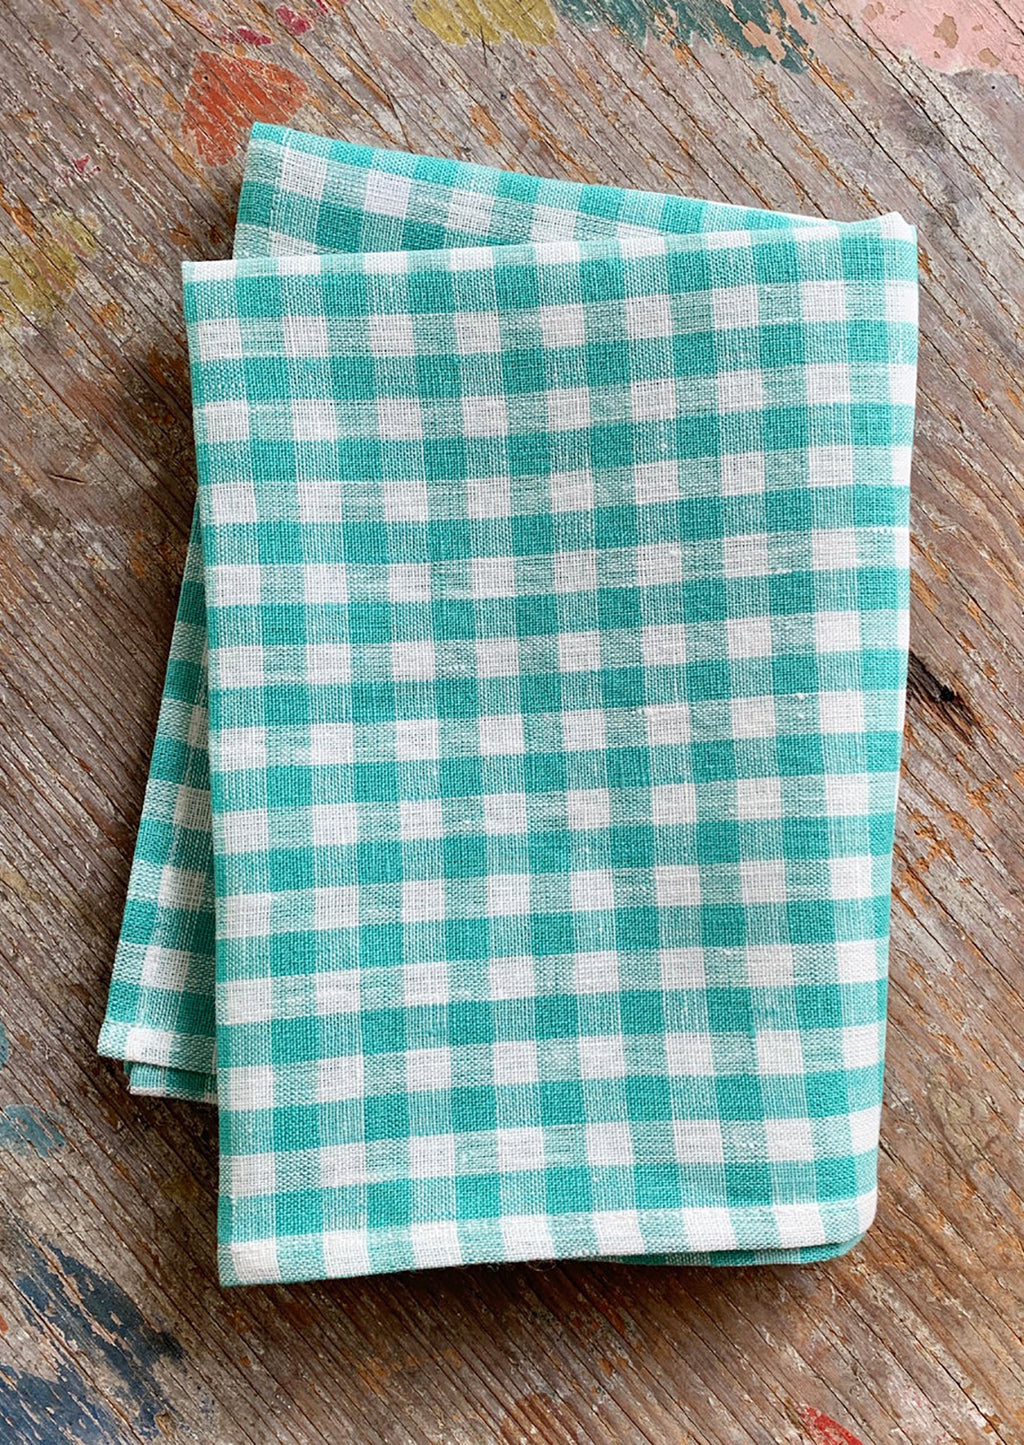 Turquoise Gingham: A linen tea towel in turquoise and white gingham.